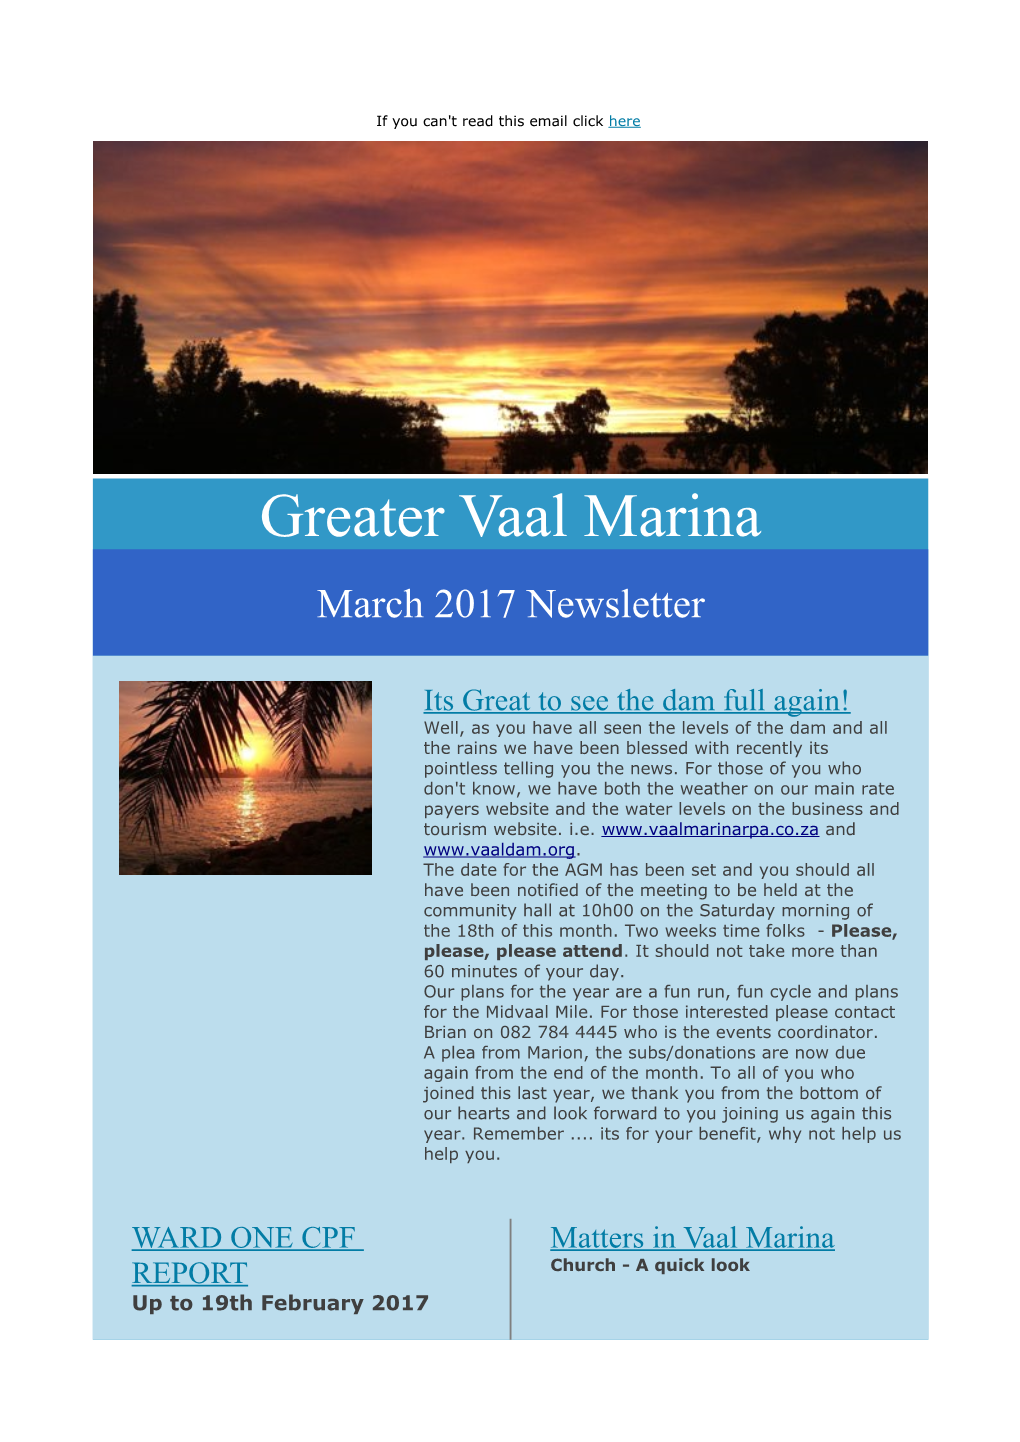 Greater Vaal Marina March 2017 Newsletter